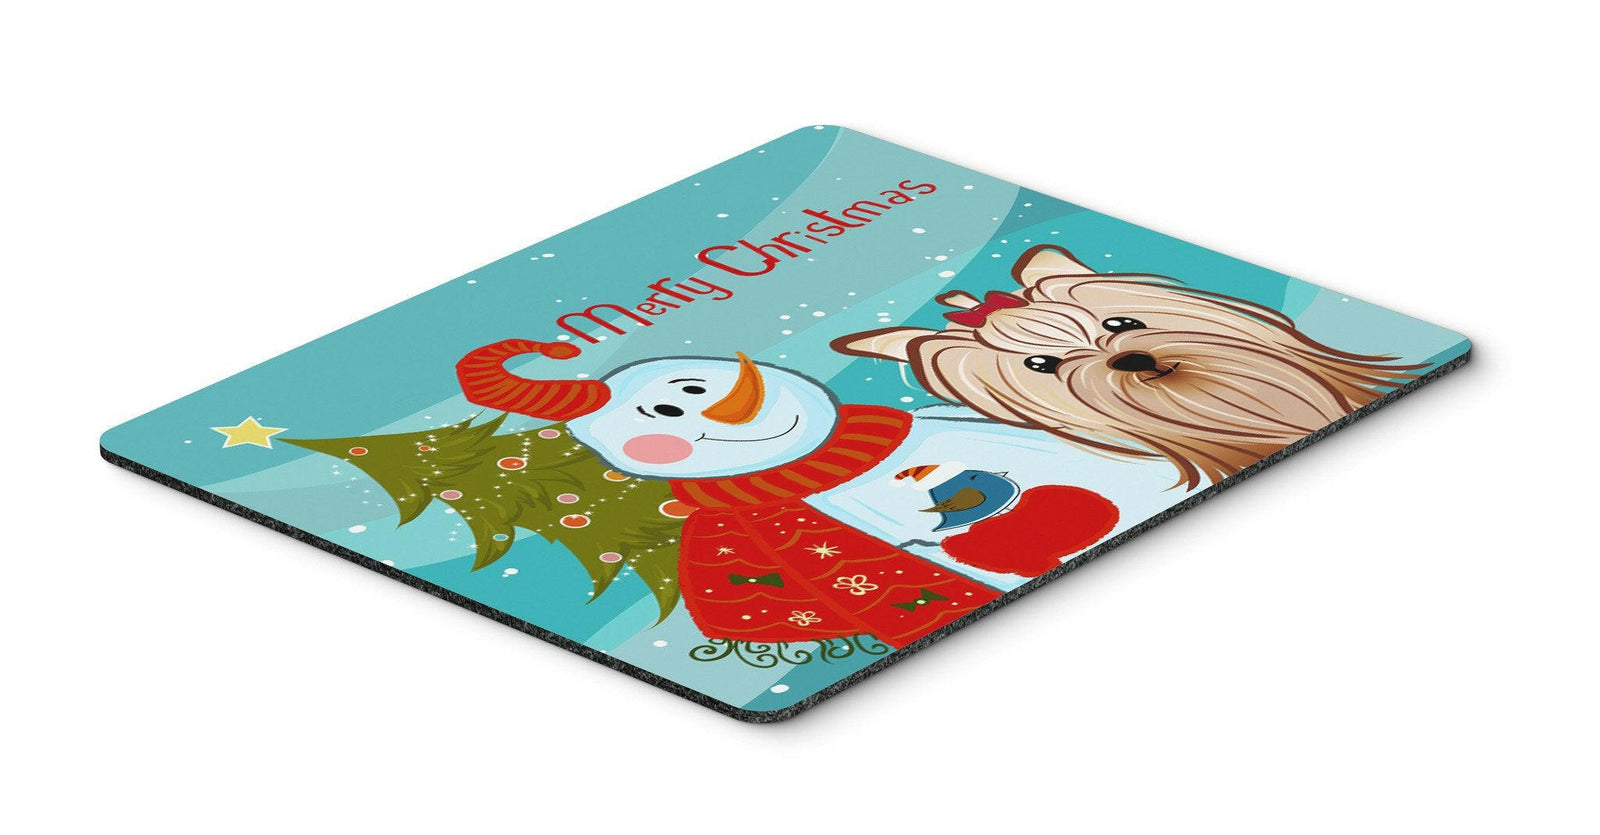 Snowman with Yorkie Yorkshire Terrier Mouse Pad, Hot Pad or Trivet BB1824MP by Caroline's Treasures